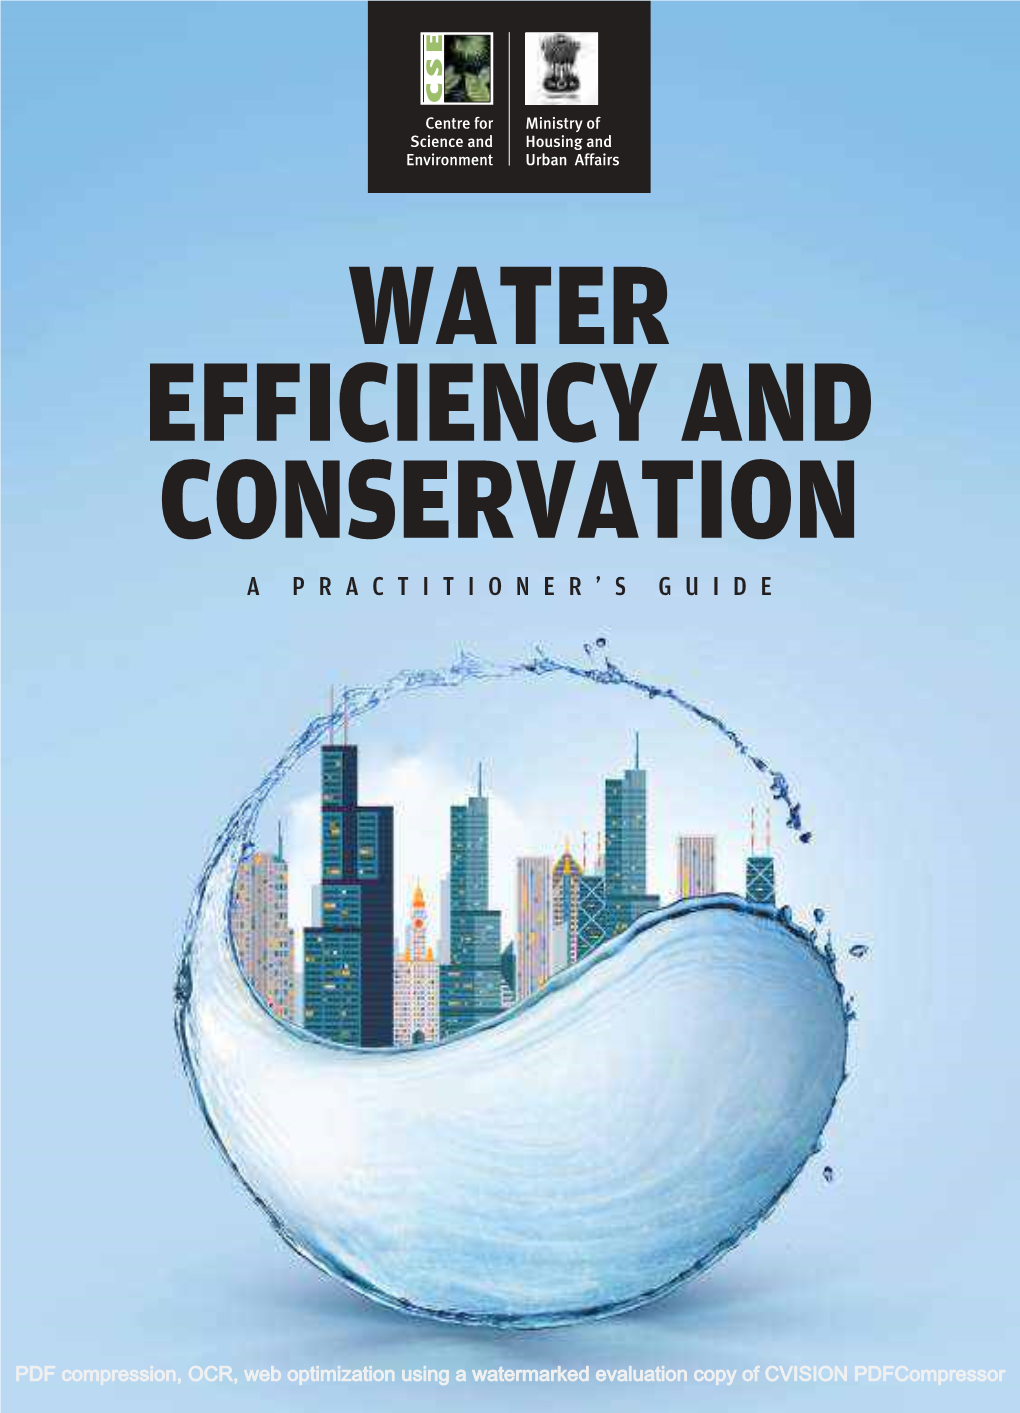 Water Efficiency and Conservation a Practitioner's Guide